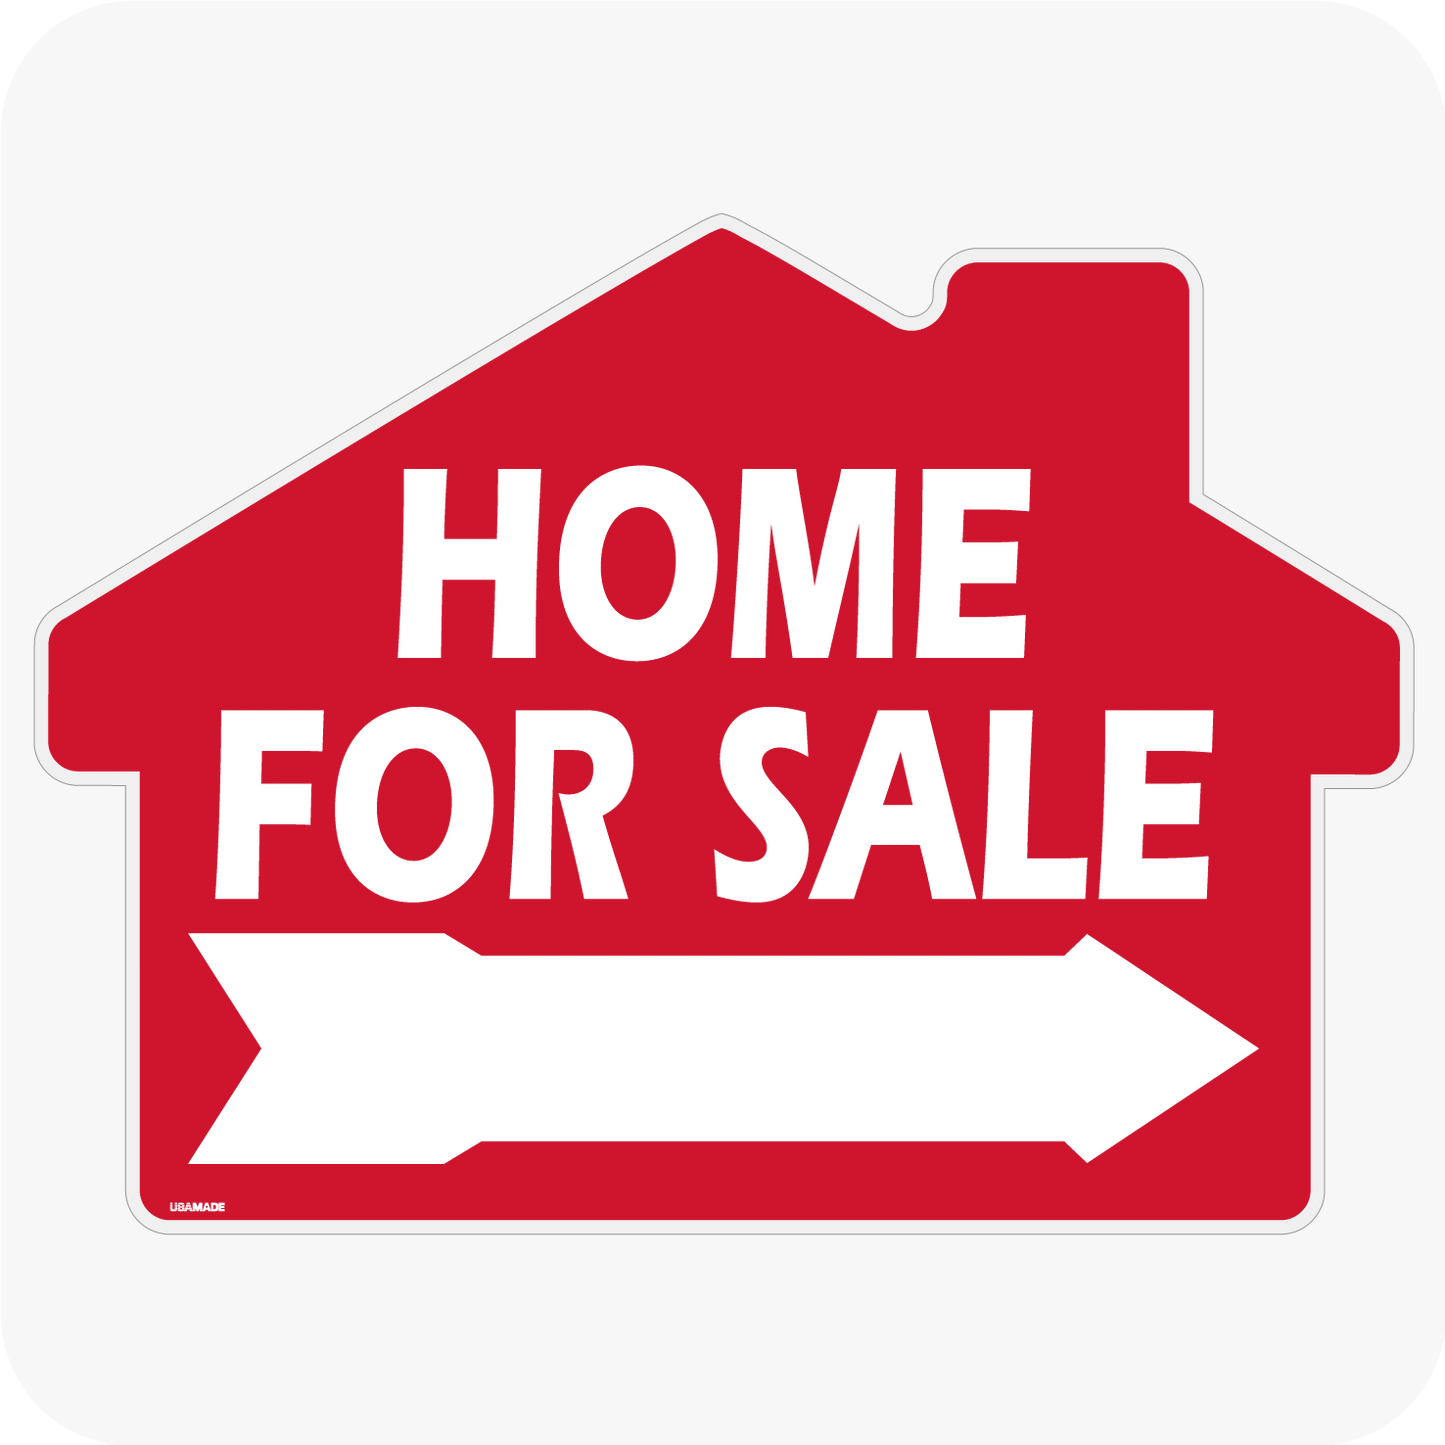 Home For Sale Rounded House Shaped Sign with Arrow 18 x 24 - Red